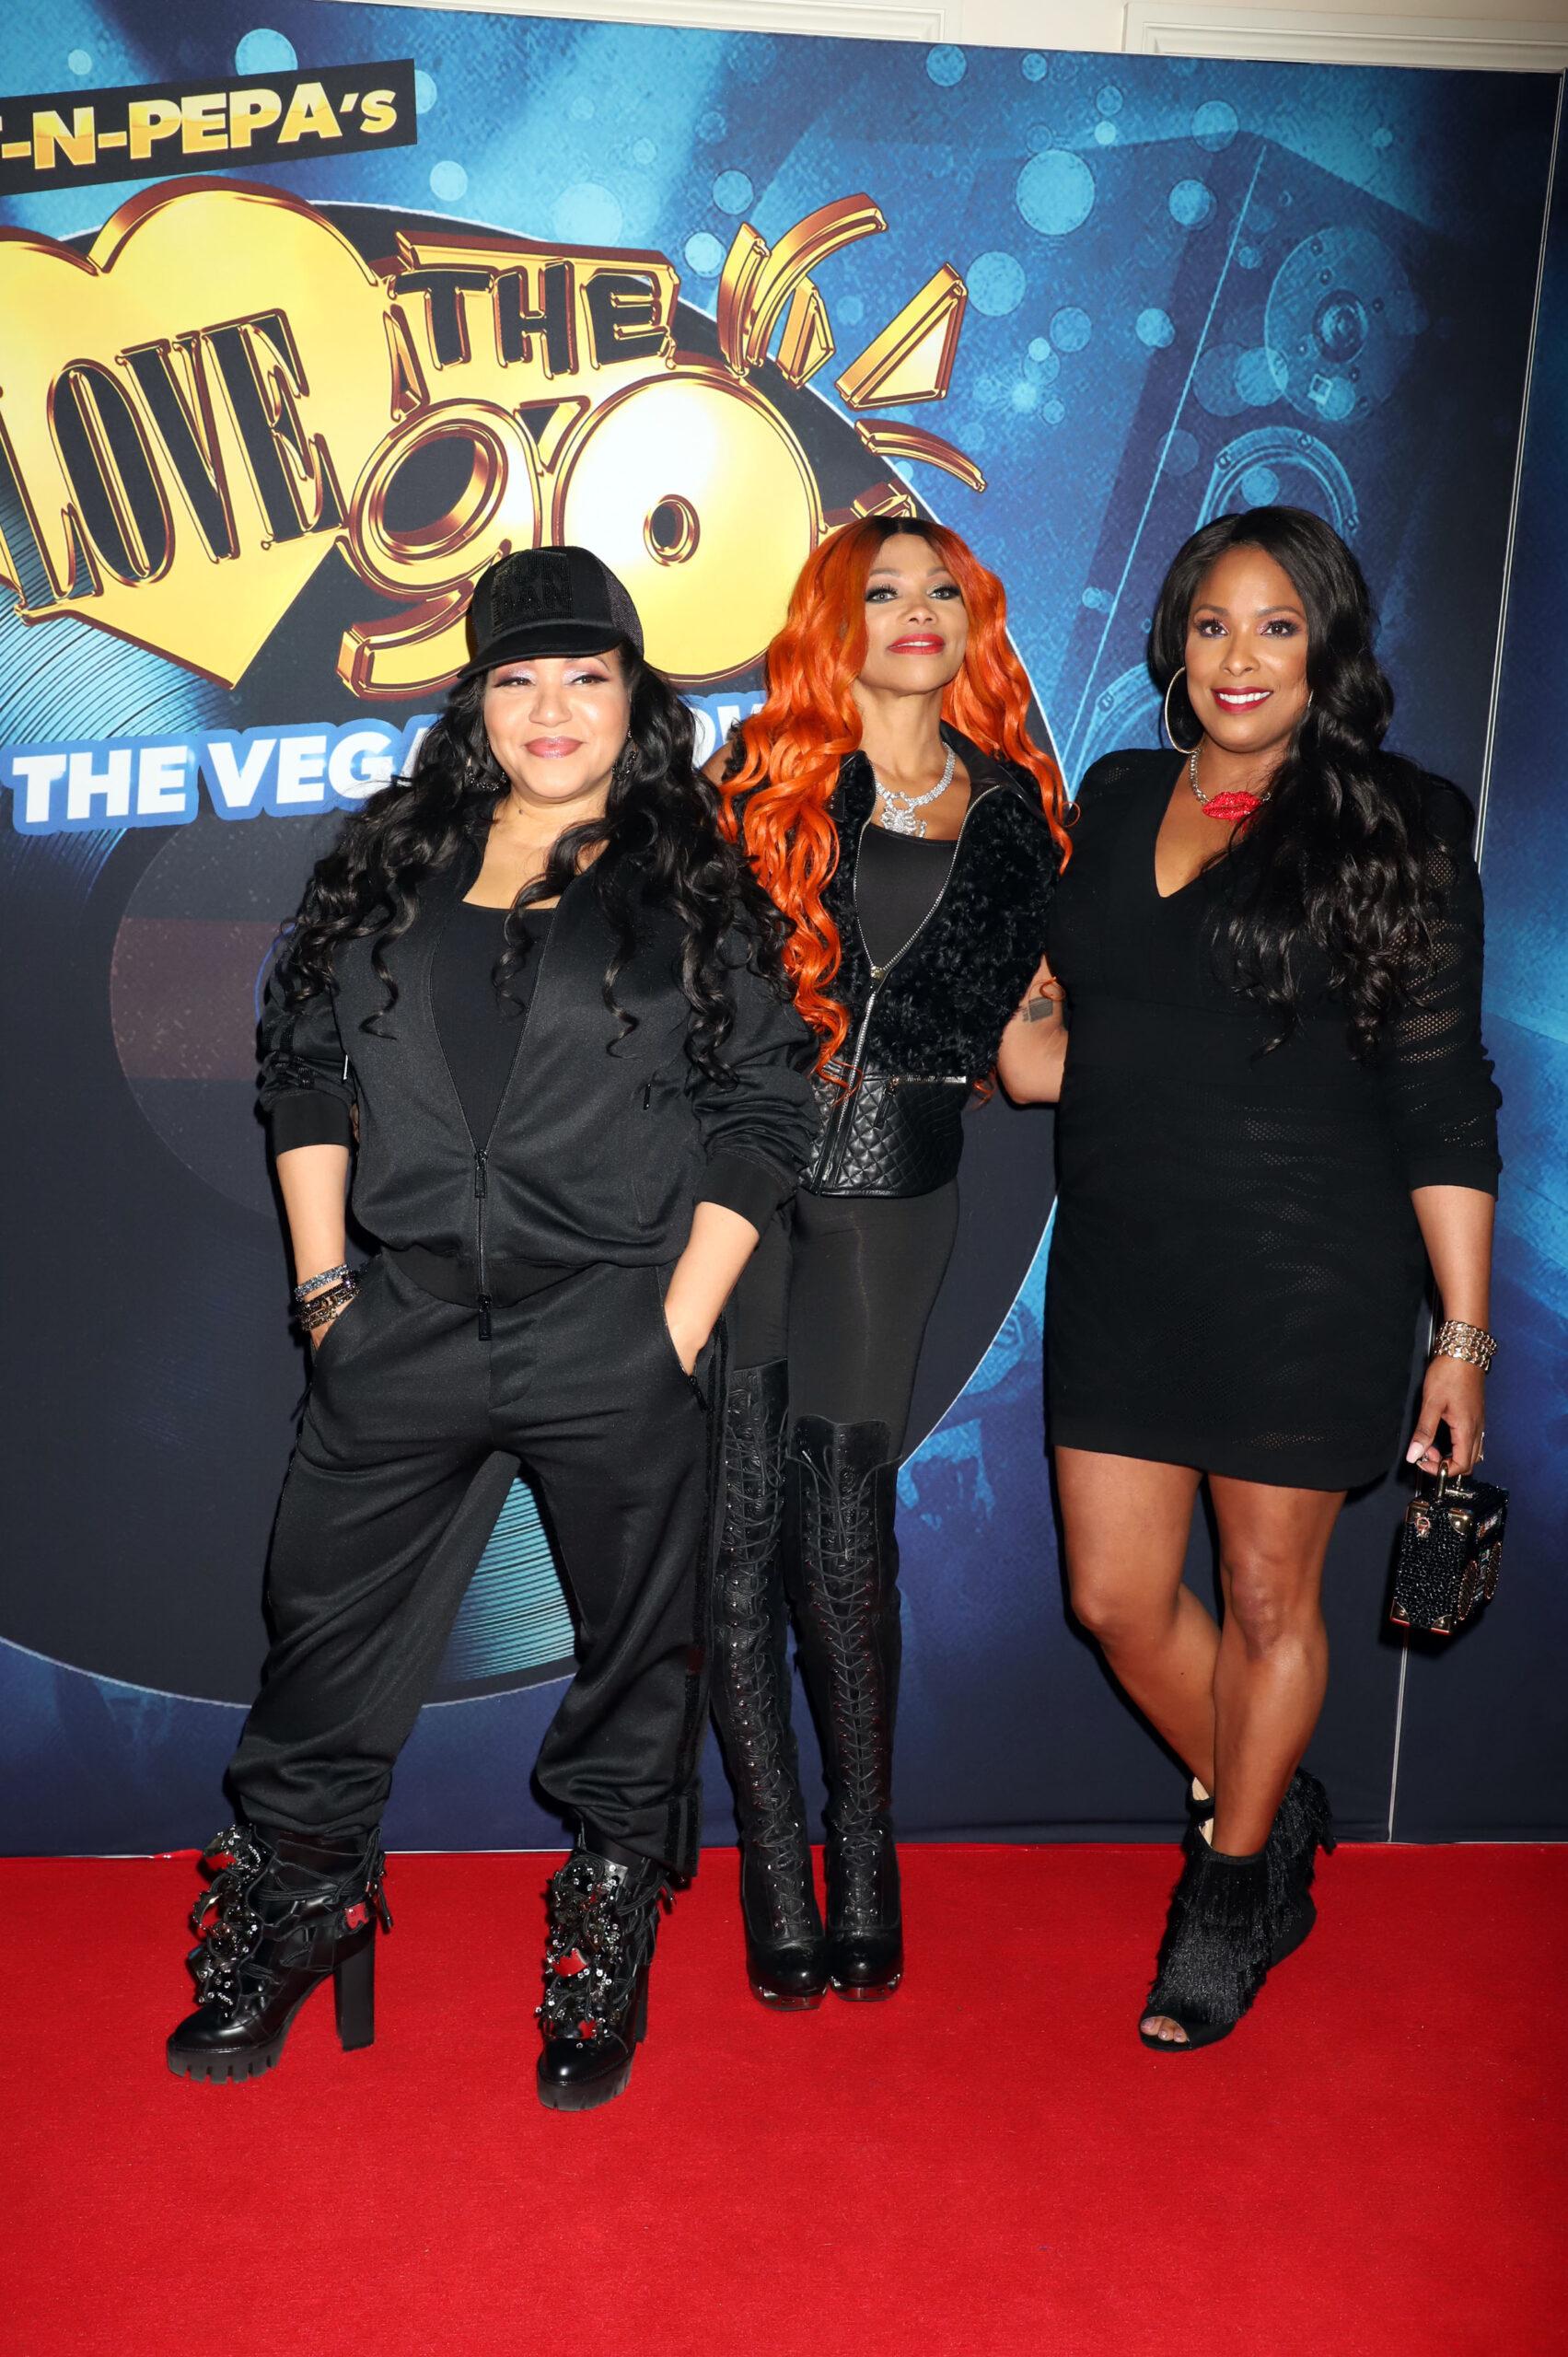 Salt-N-Pepa on Fighting for Recognition, Hollywood Walk of Fame Star